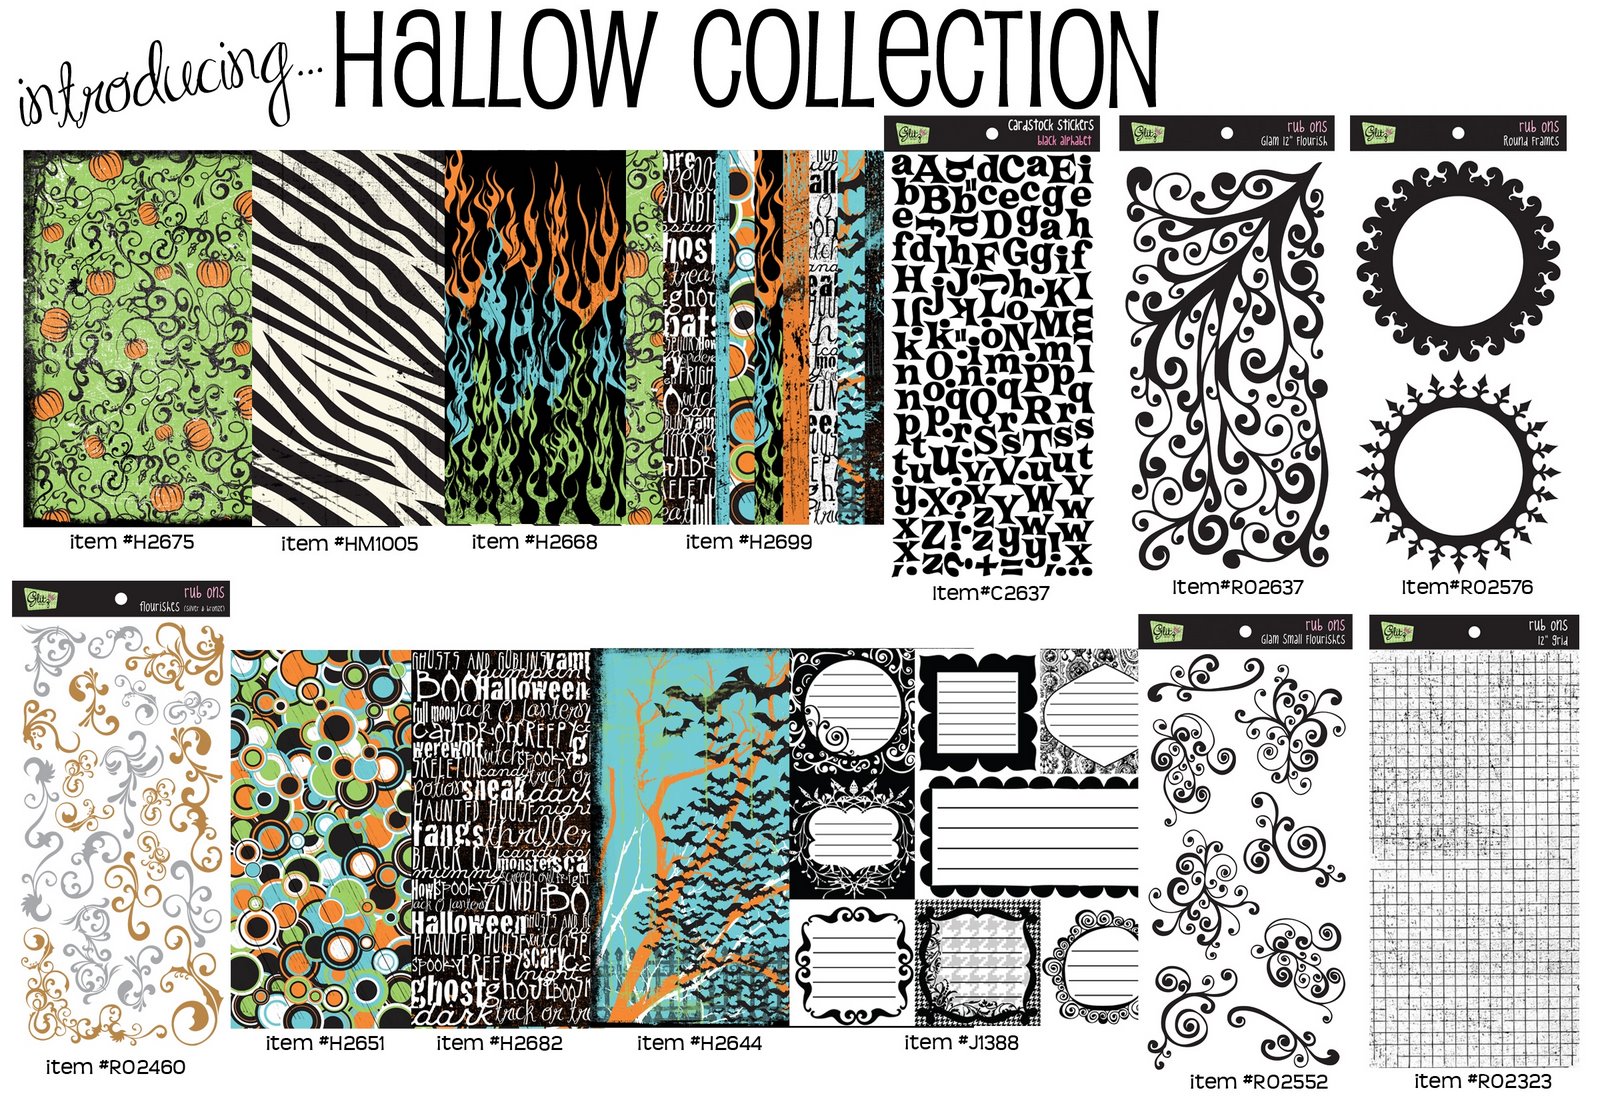 [Hallow+Collection+copy[1].JPG]